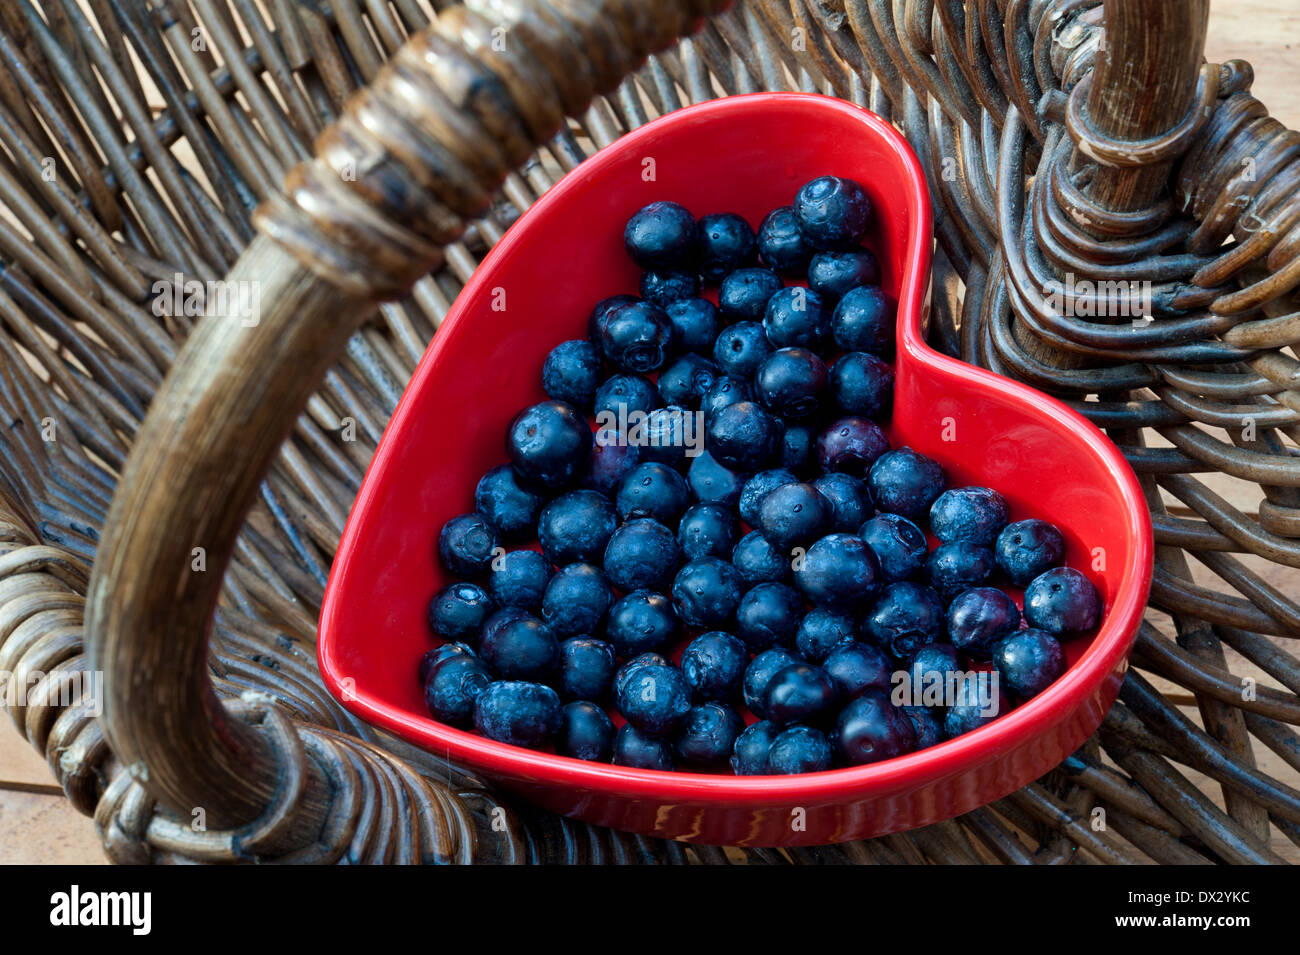 BLUEBERRIES HEART HEALTH BASKET SHOPPING Healthy food concept / Blueberries in a red heart shaped dish in a traditional wicker basket Stock Photo